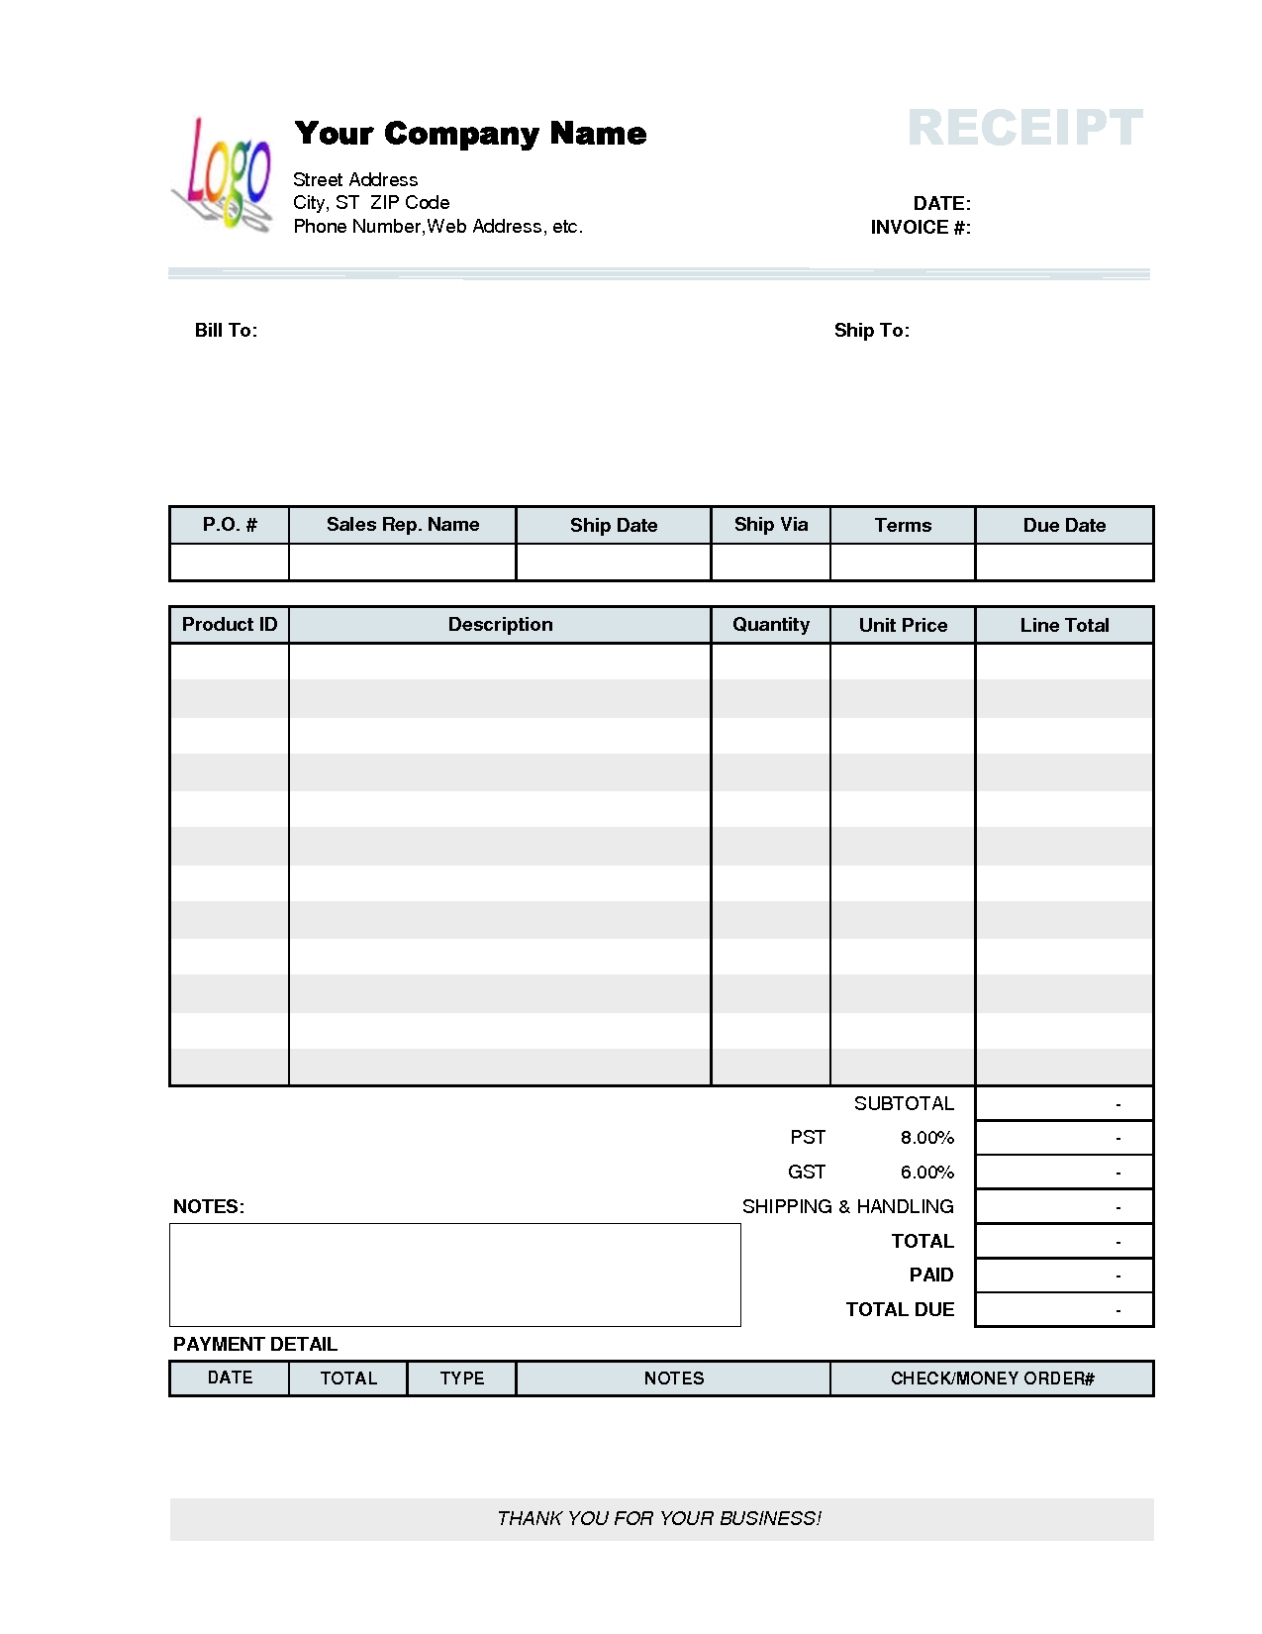 Receipt Invoice Template | Invoice Example With Image Of Invoice Template